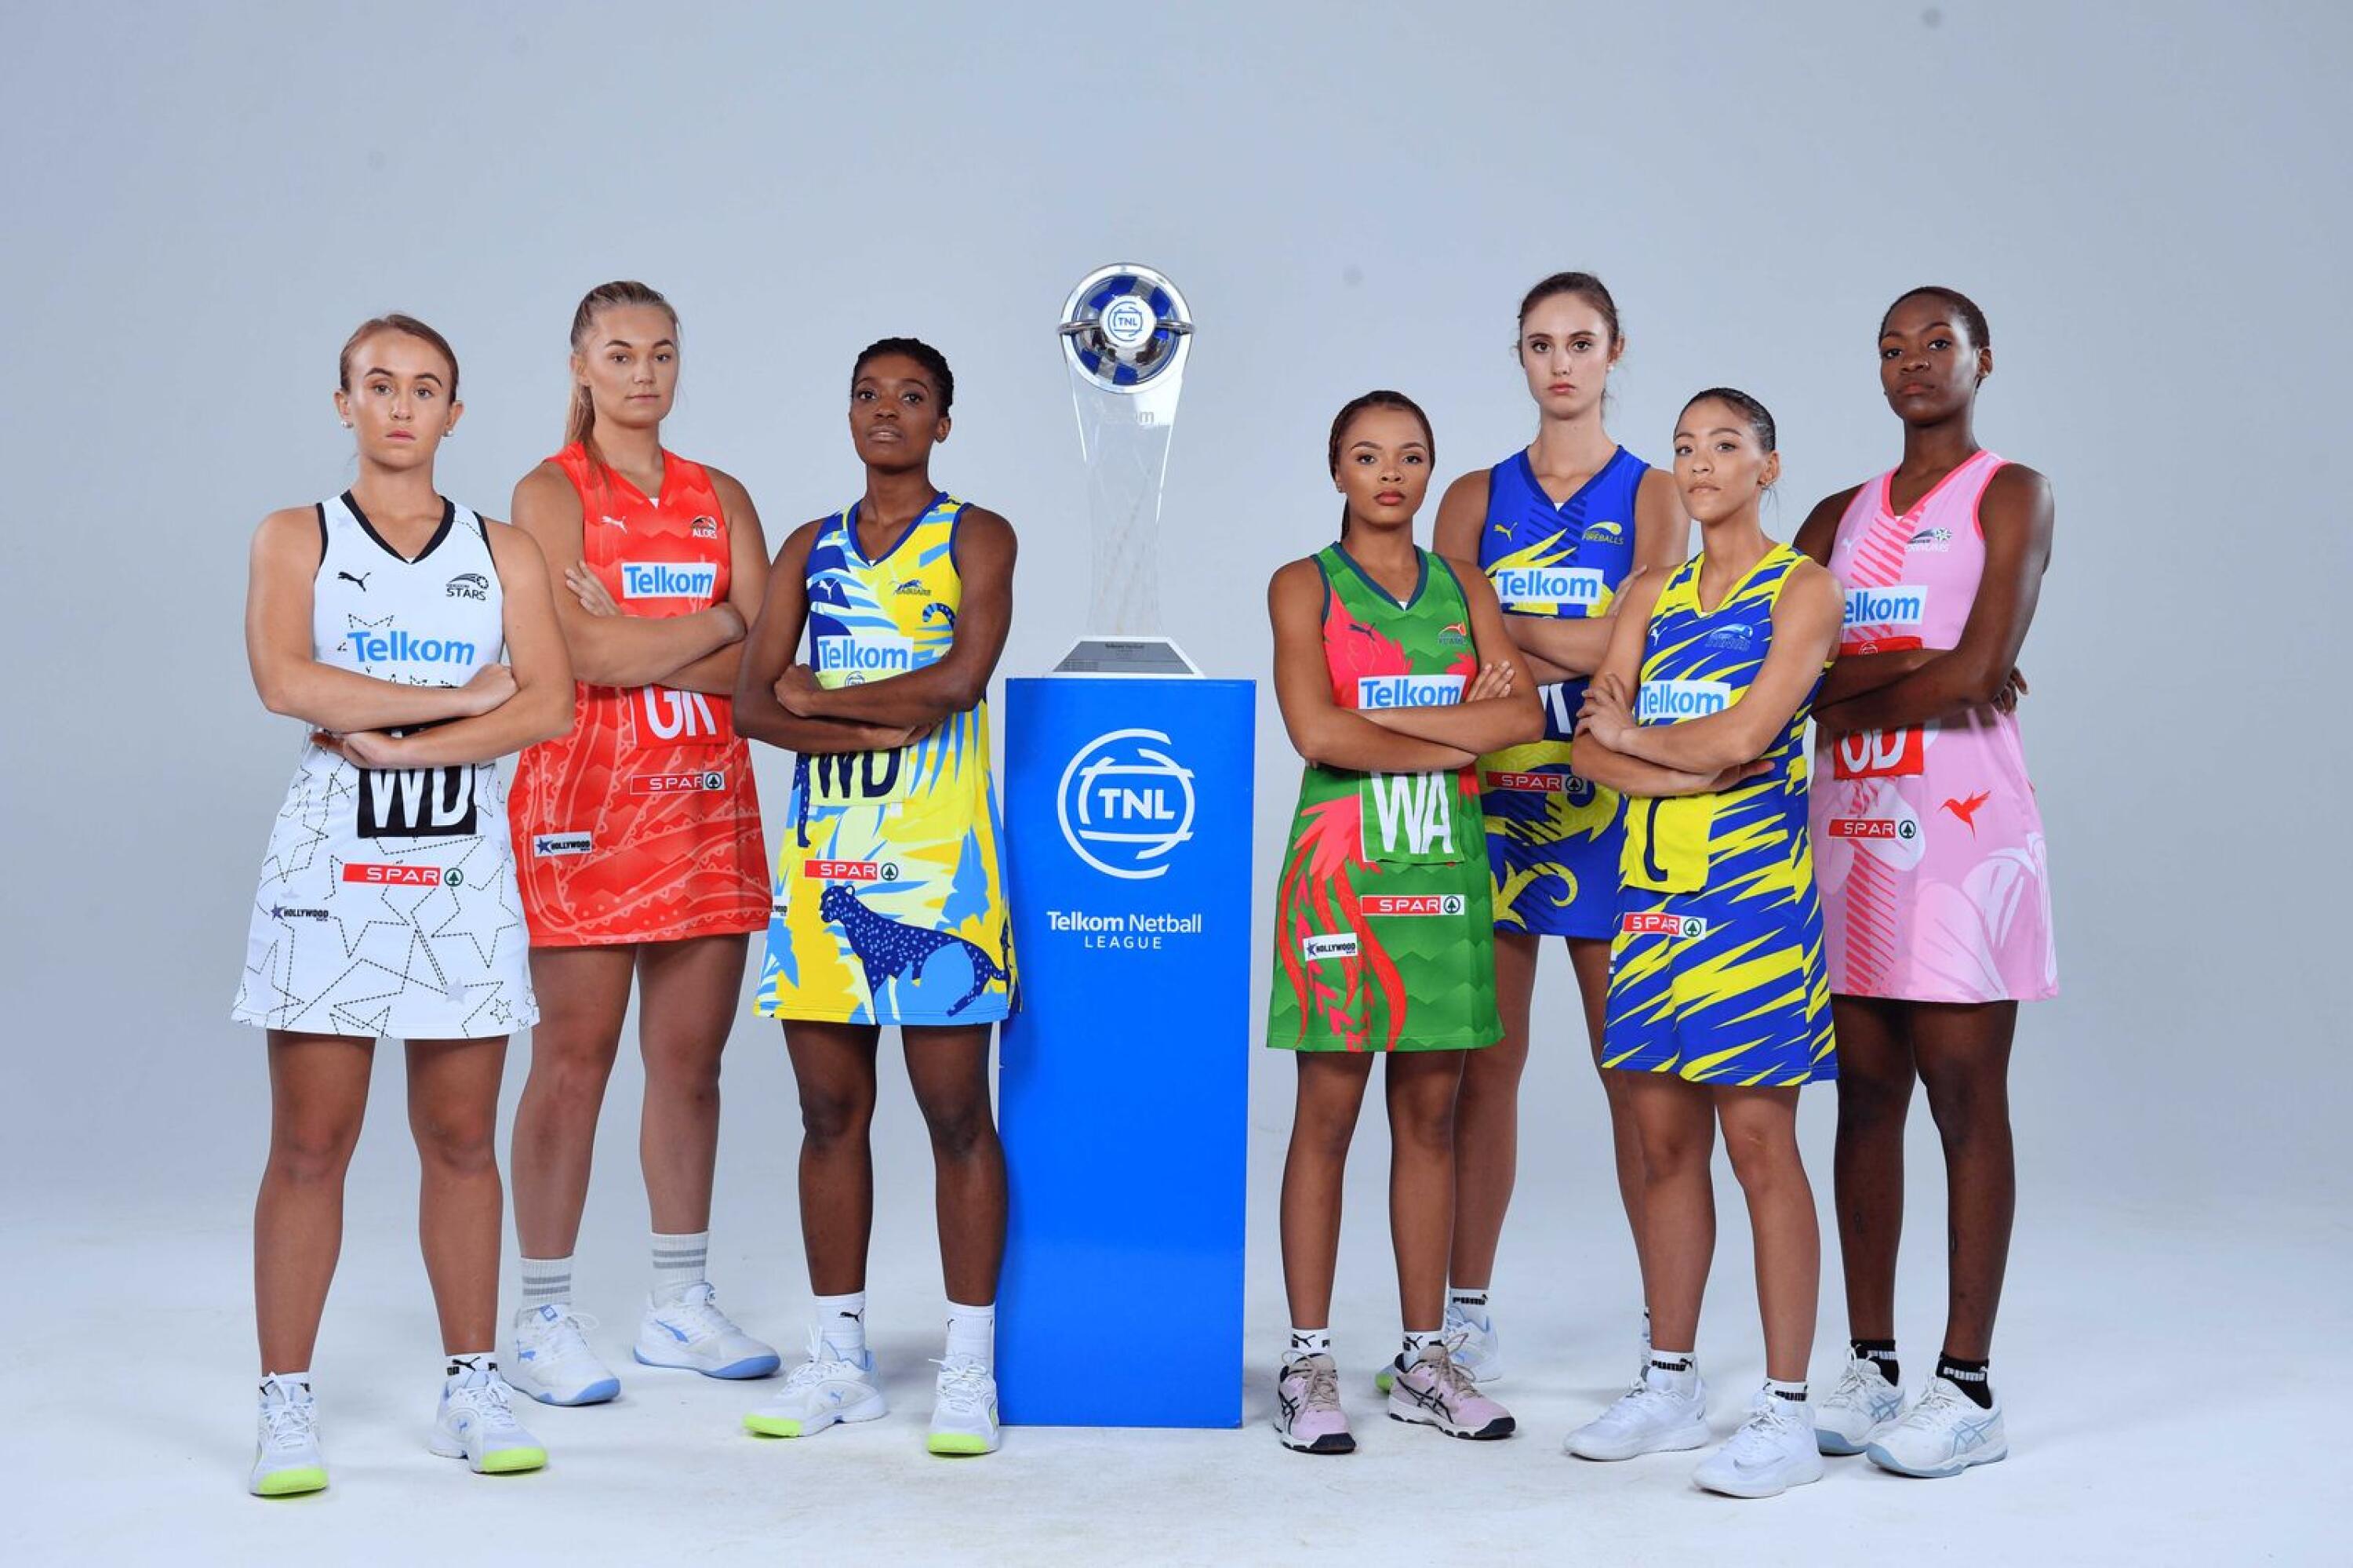 Players pose for a photo ahead of the start of the new Telkom Netball League season